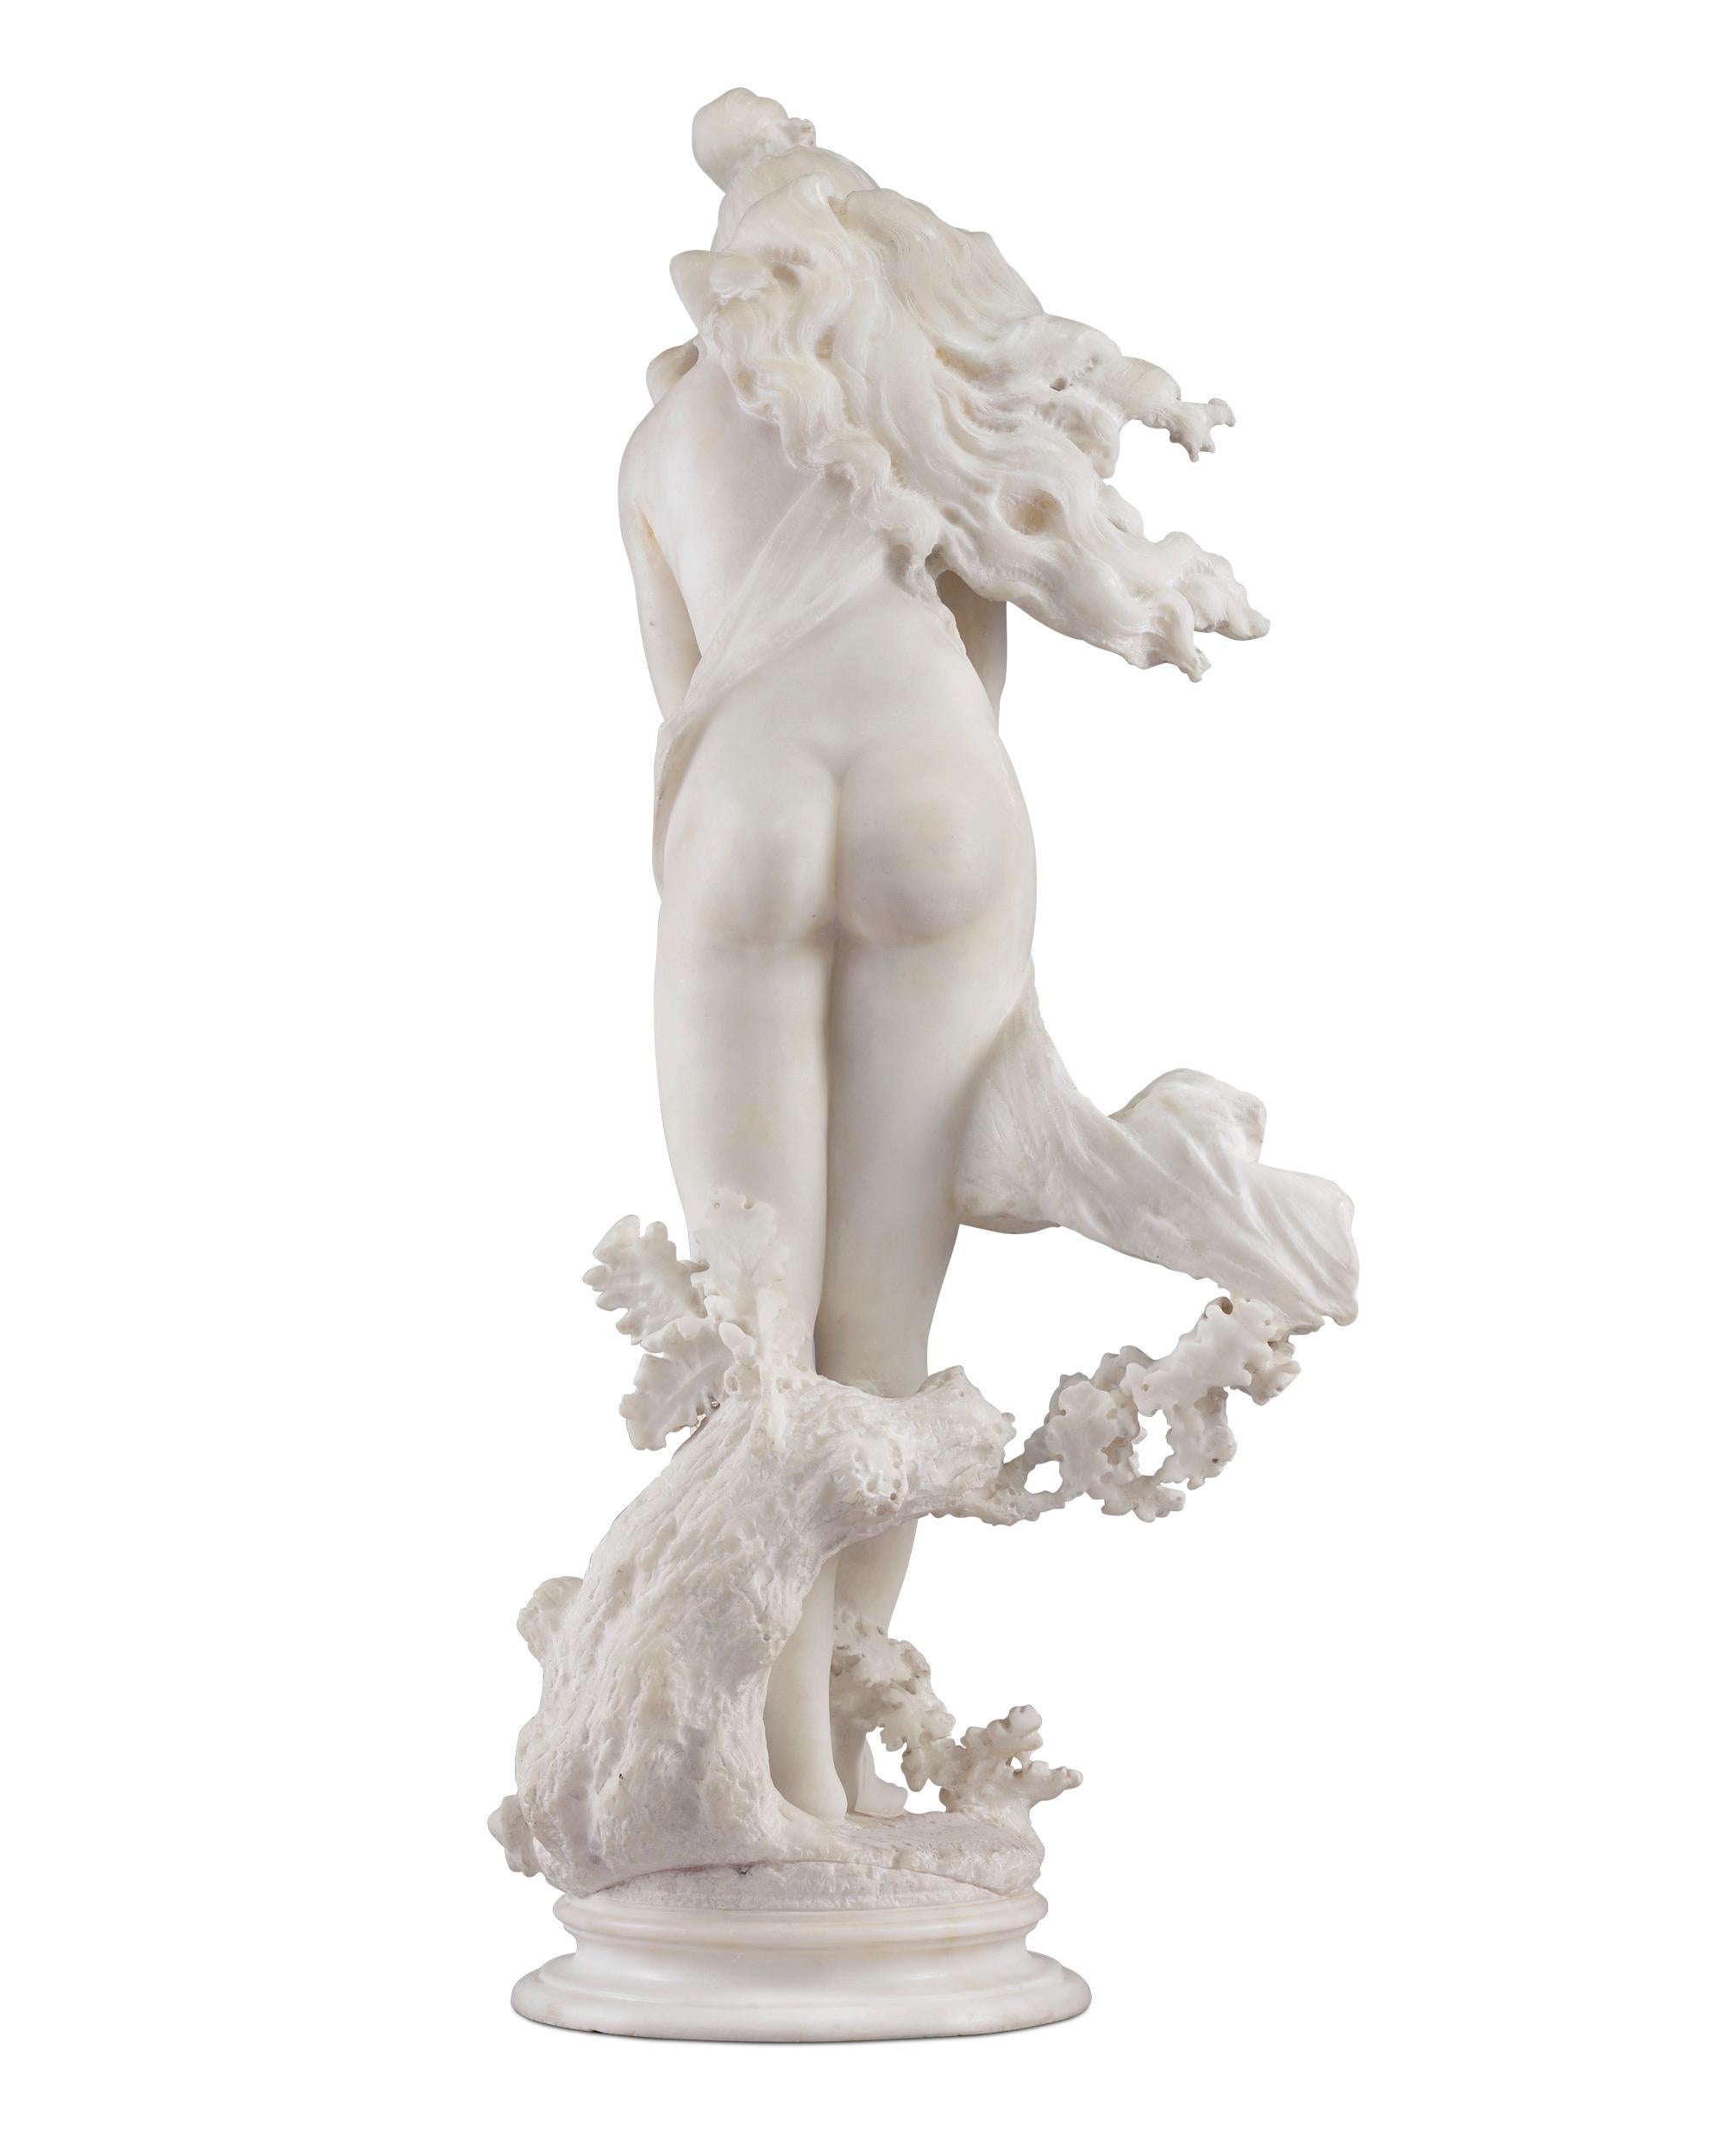 A beautiful woodland nymph playfully covers her nude form in this white marble sculpture by the Florentine artist Vittorio Caradossi. The nymph emerges from the forest decorated in beads and windblown, an effect effortlessly achieved by Caradossi,